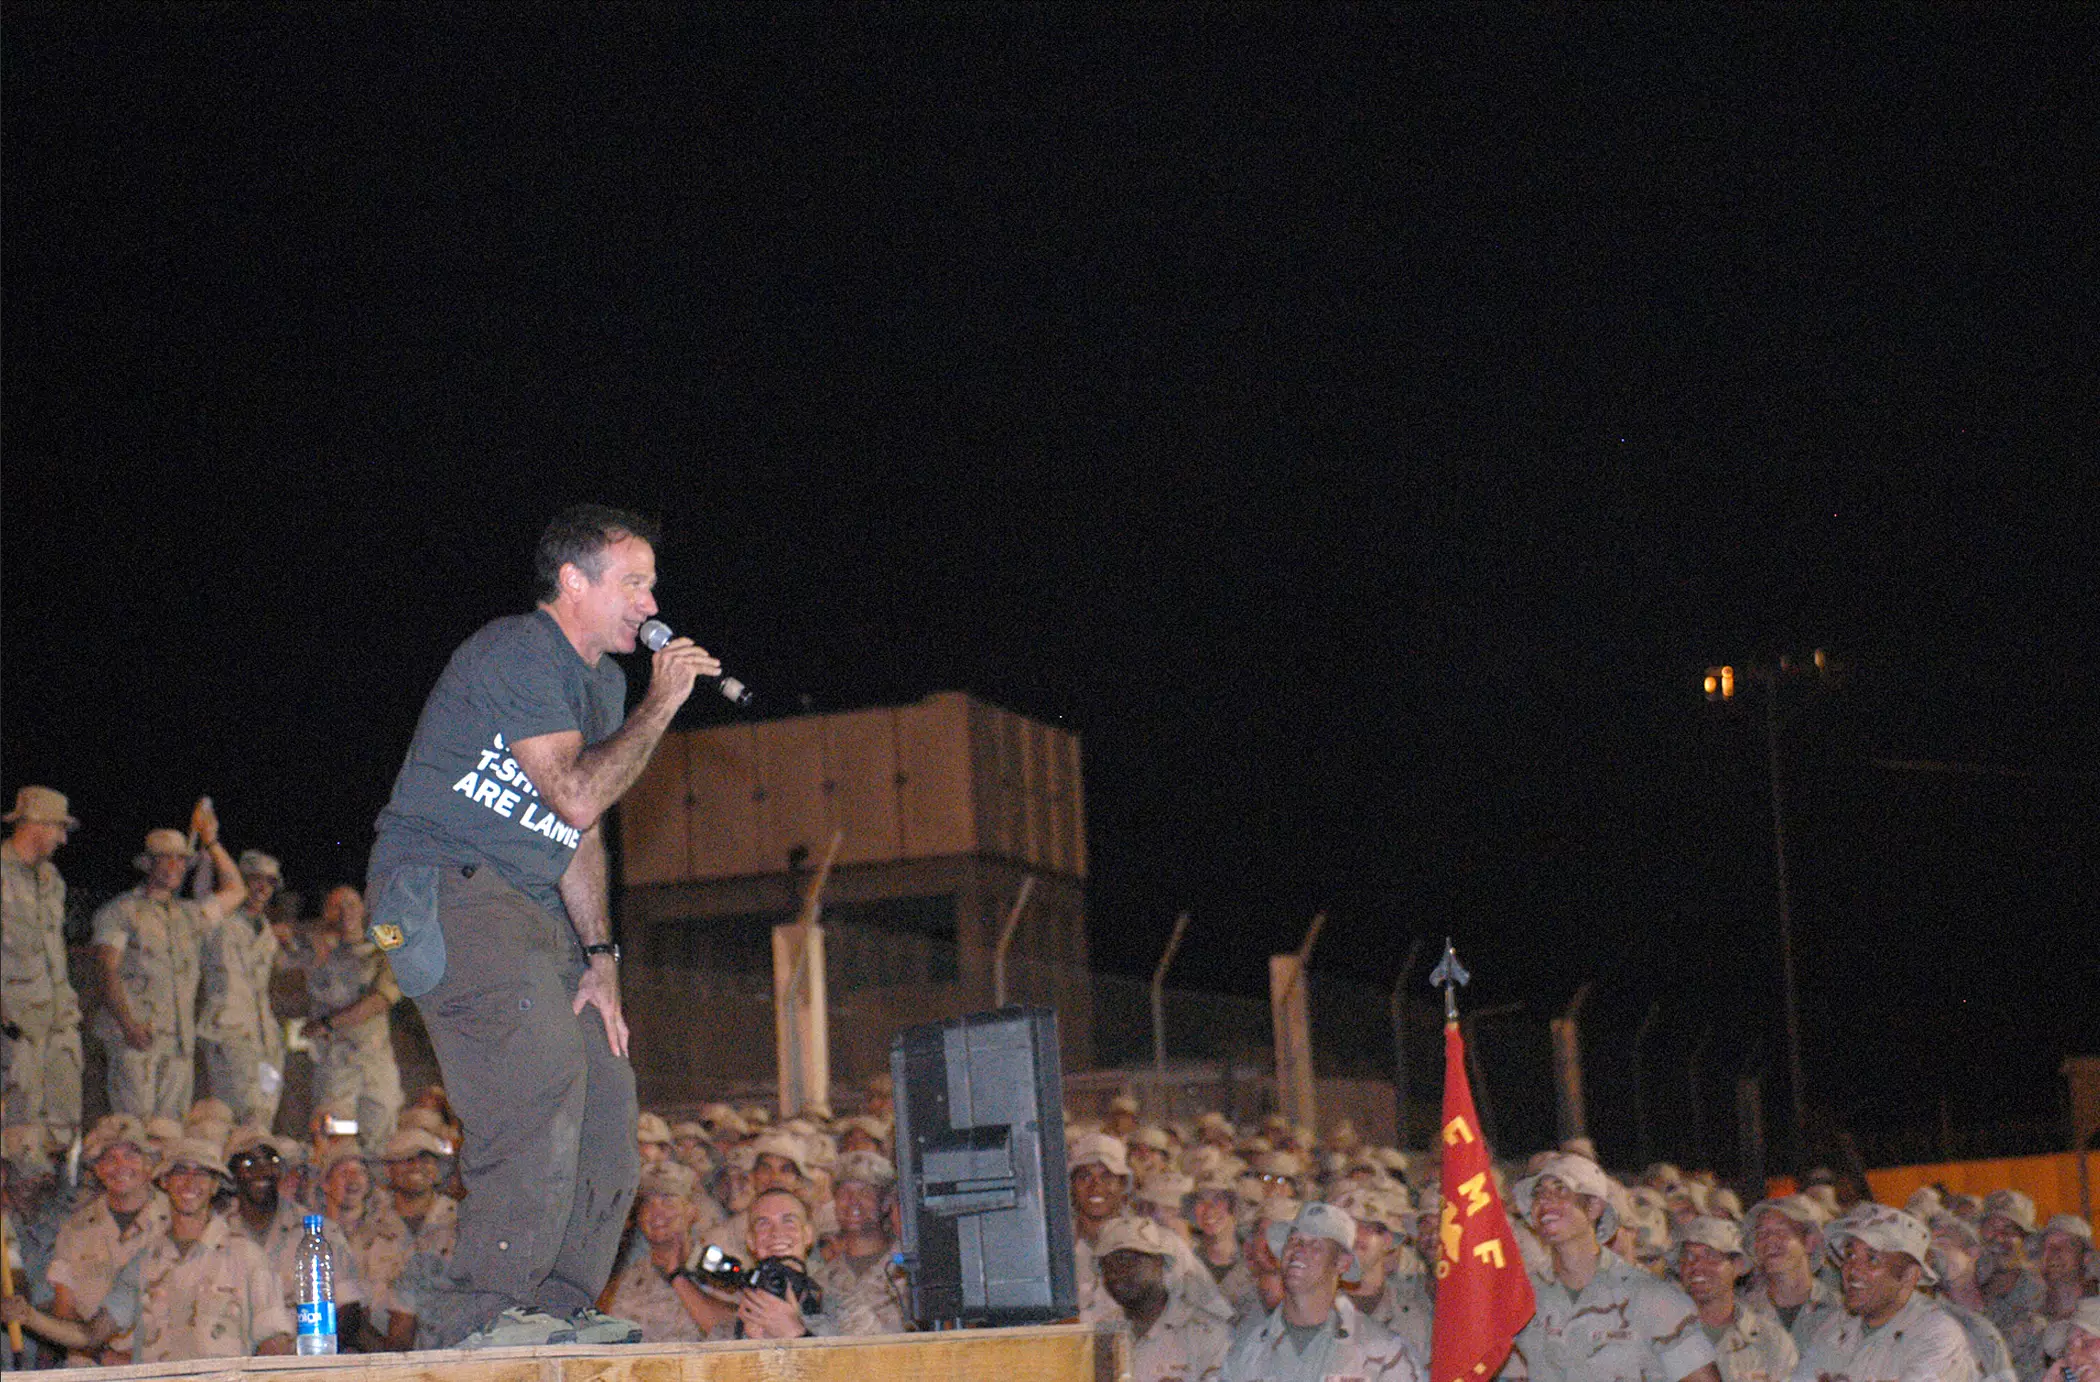 Robin Williams entertaining US soldiers in a Djibouti-based camp in 2003.